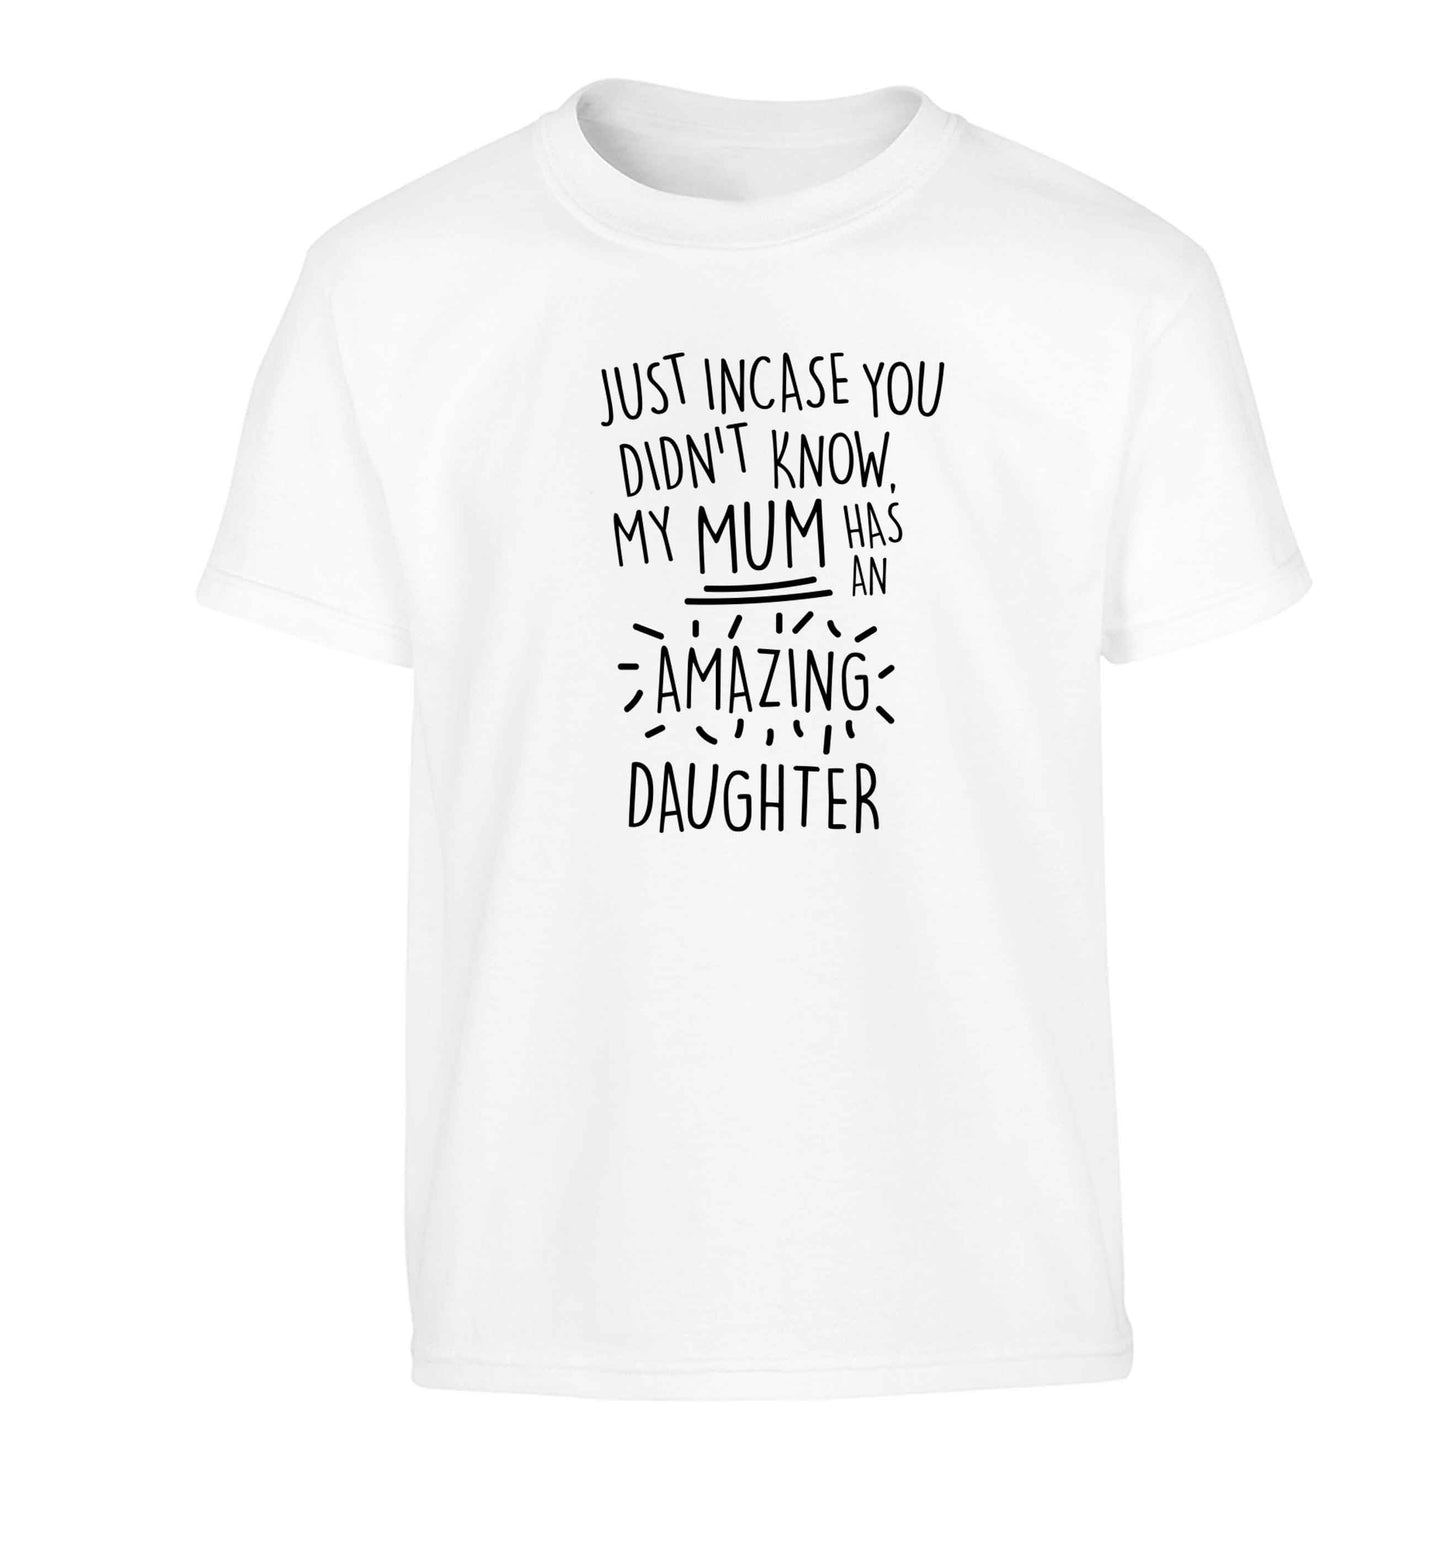 Just incase you didn't know my mum has an amazing daughter Children's white Tshirt 12-13 Years